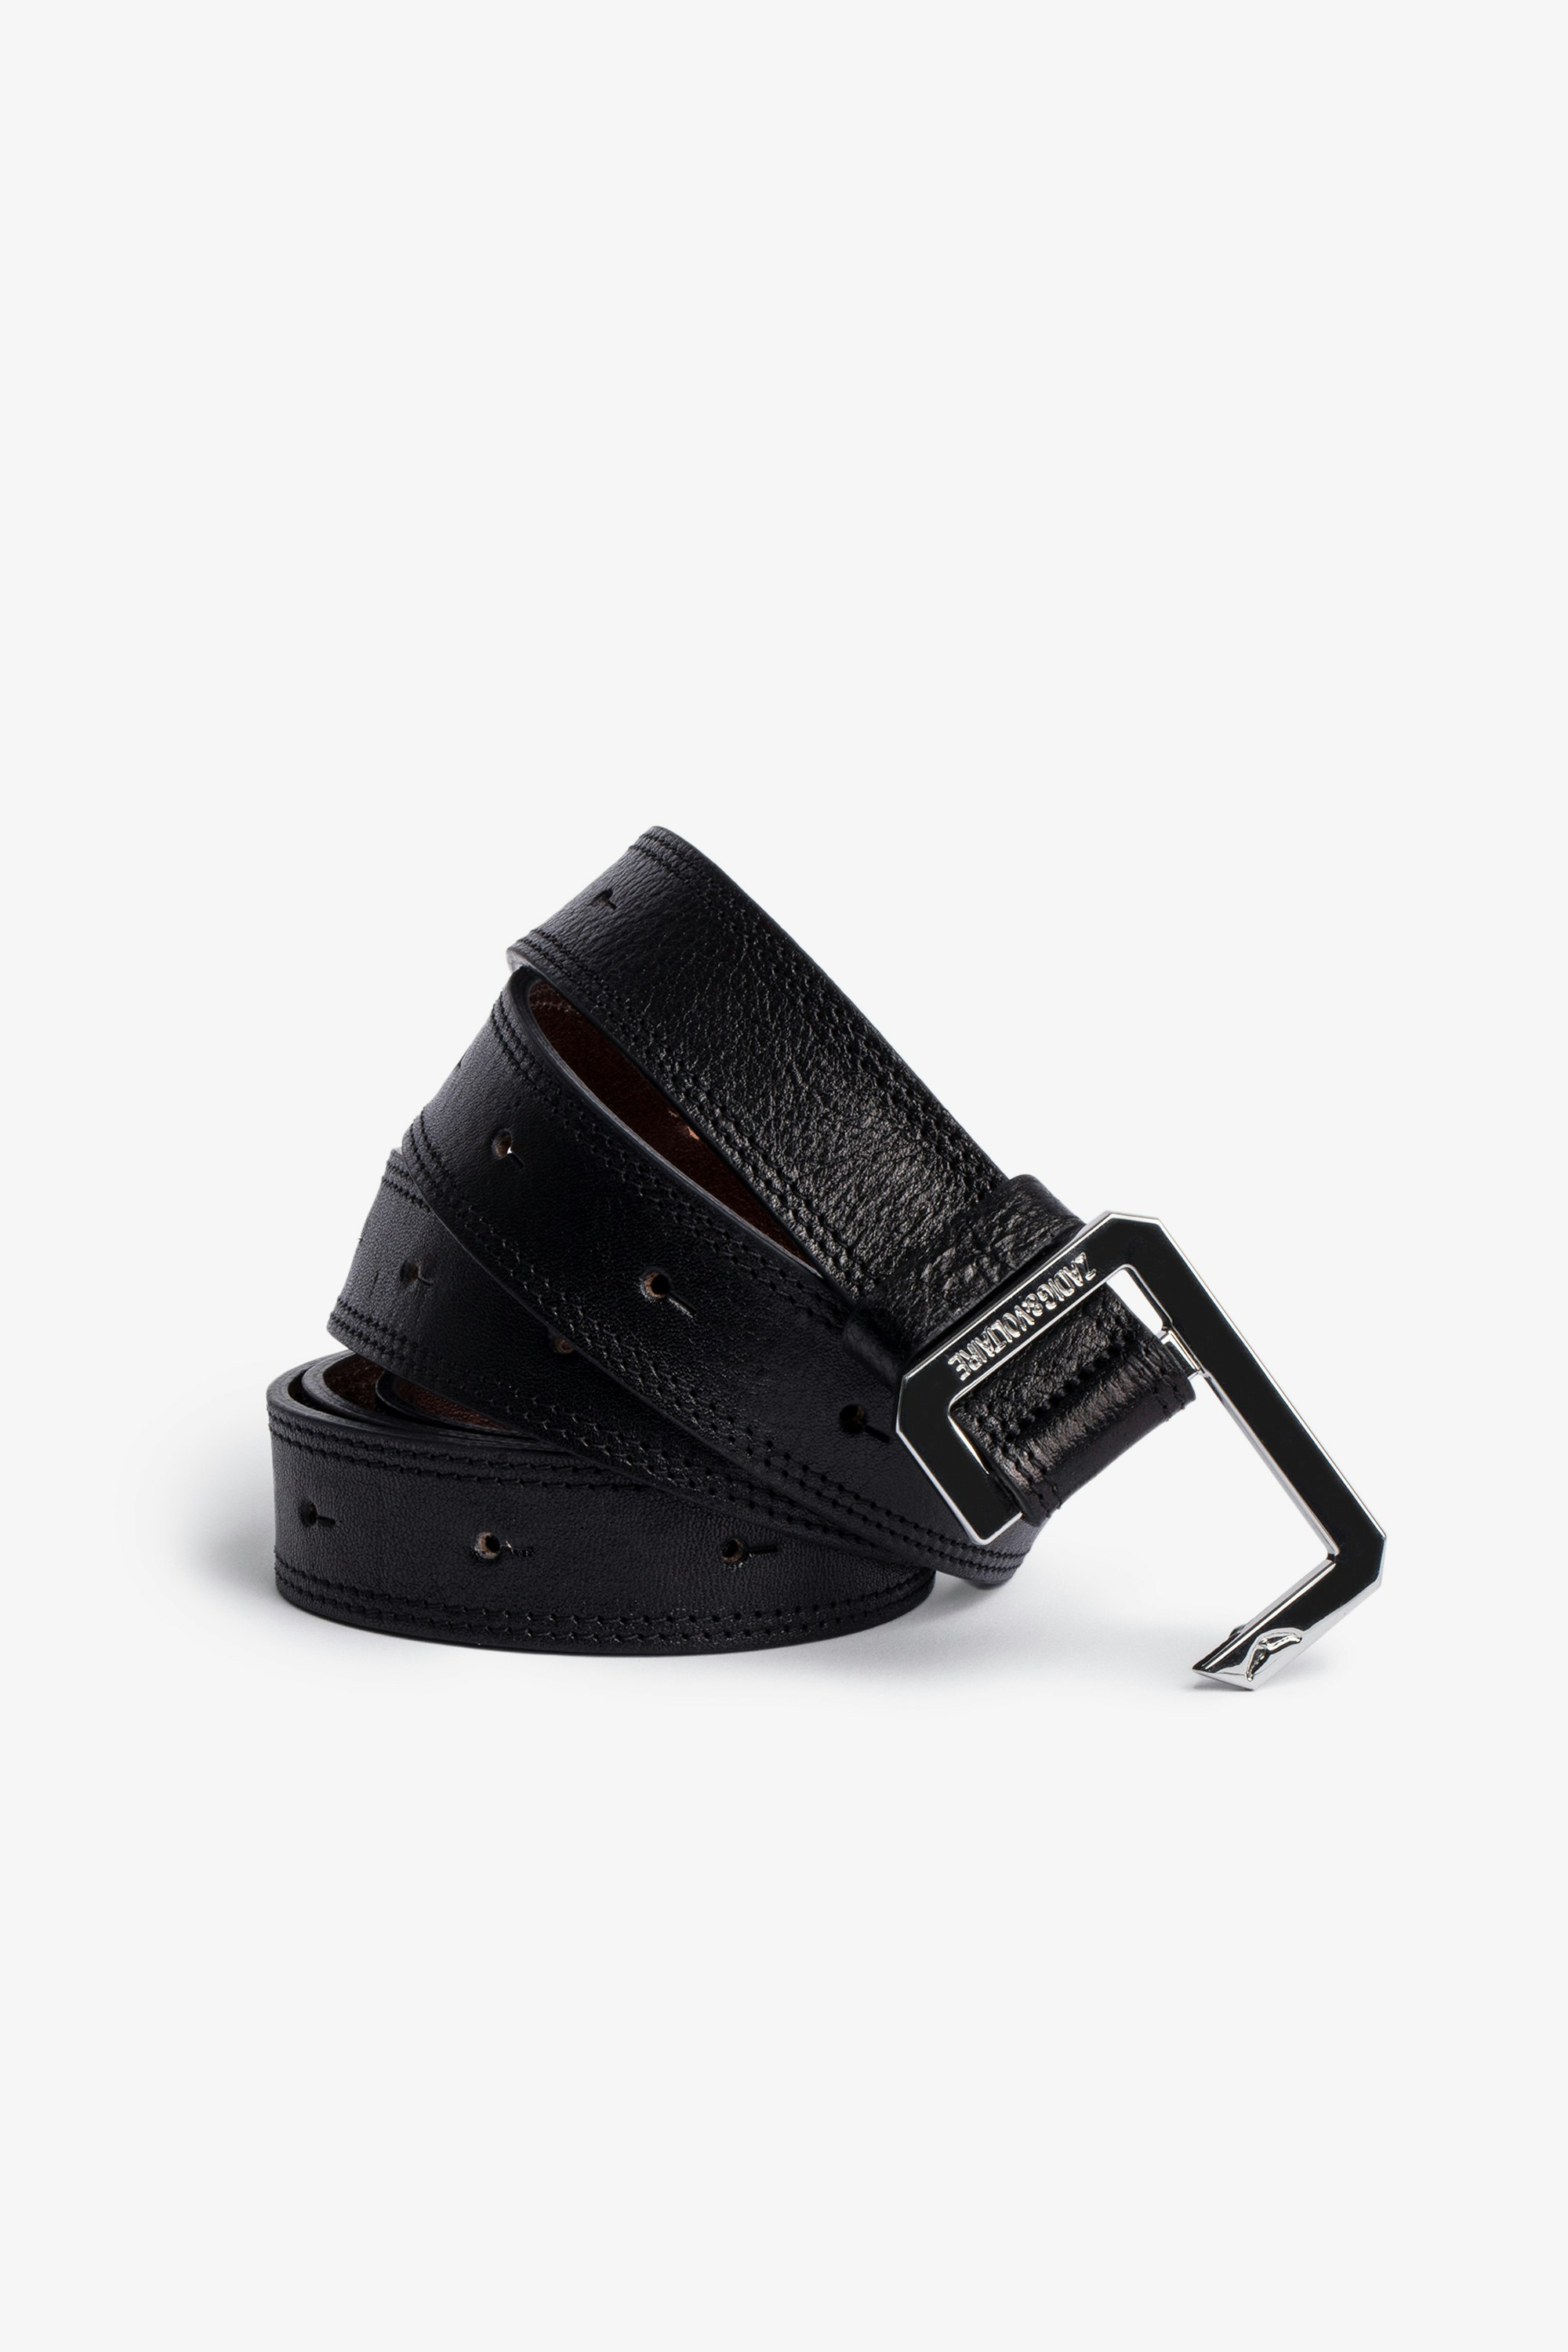 La Cecilia Belt Leather Women's black leather belt with black C-shaped buckle. Buying this product, you support a responsible leather production through Leather Working Group.